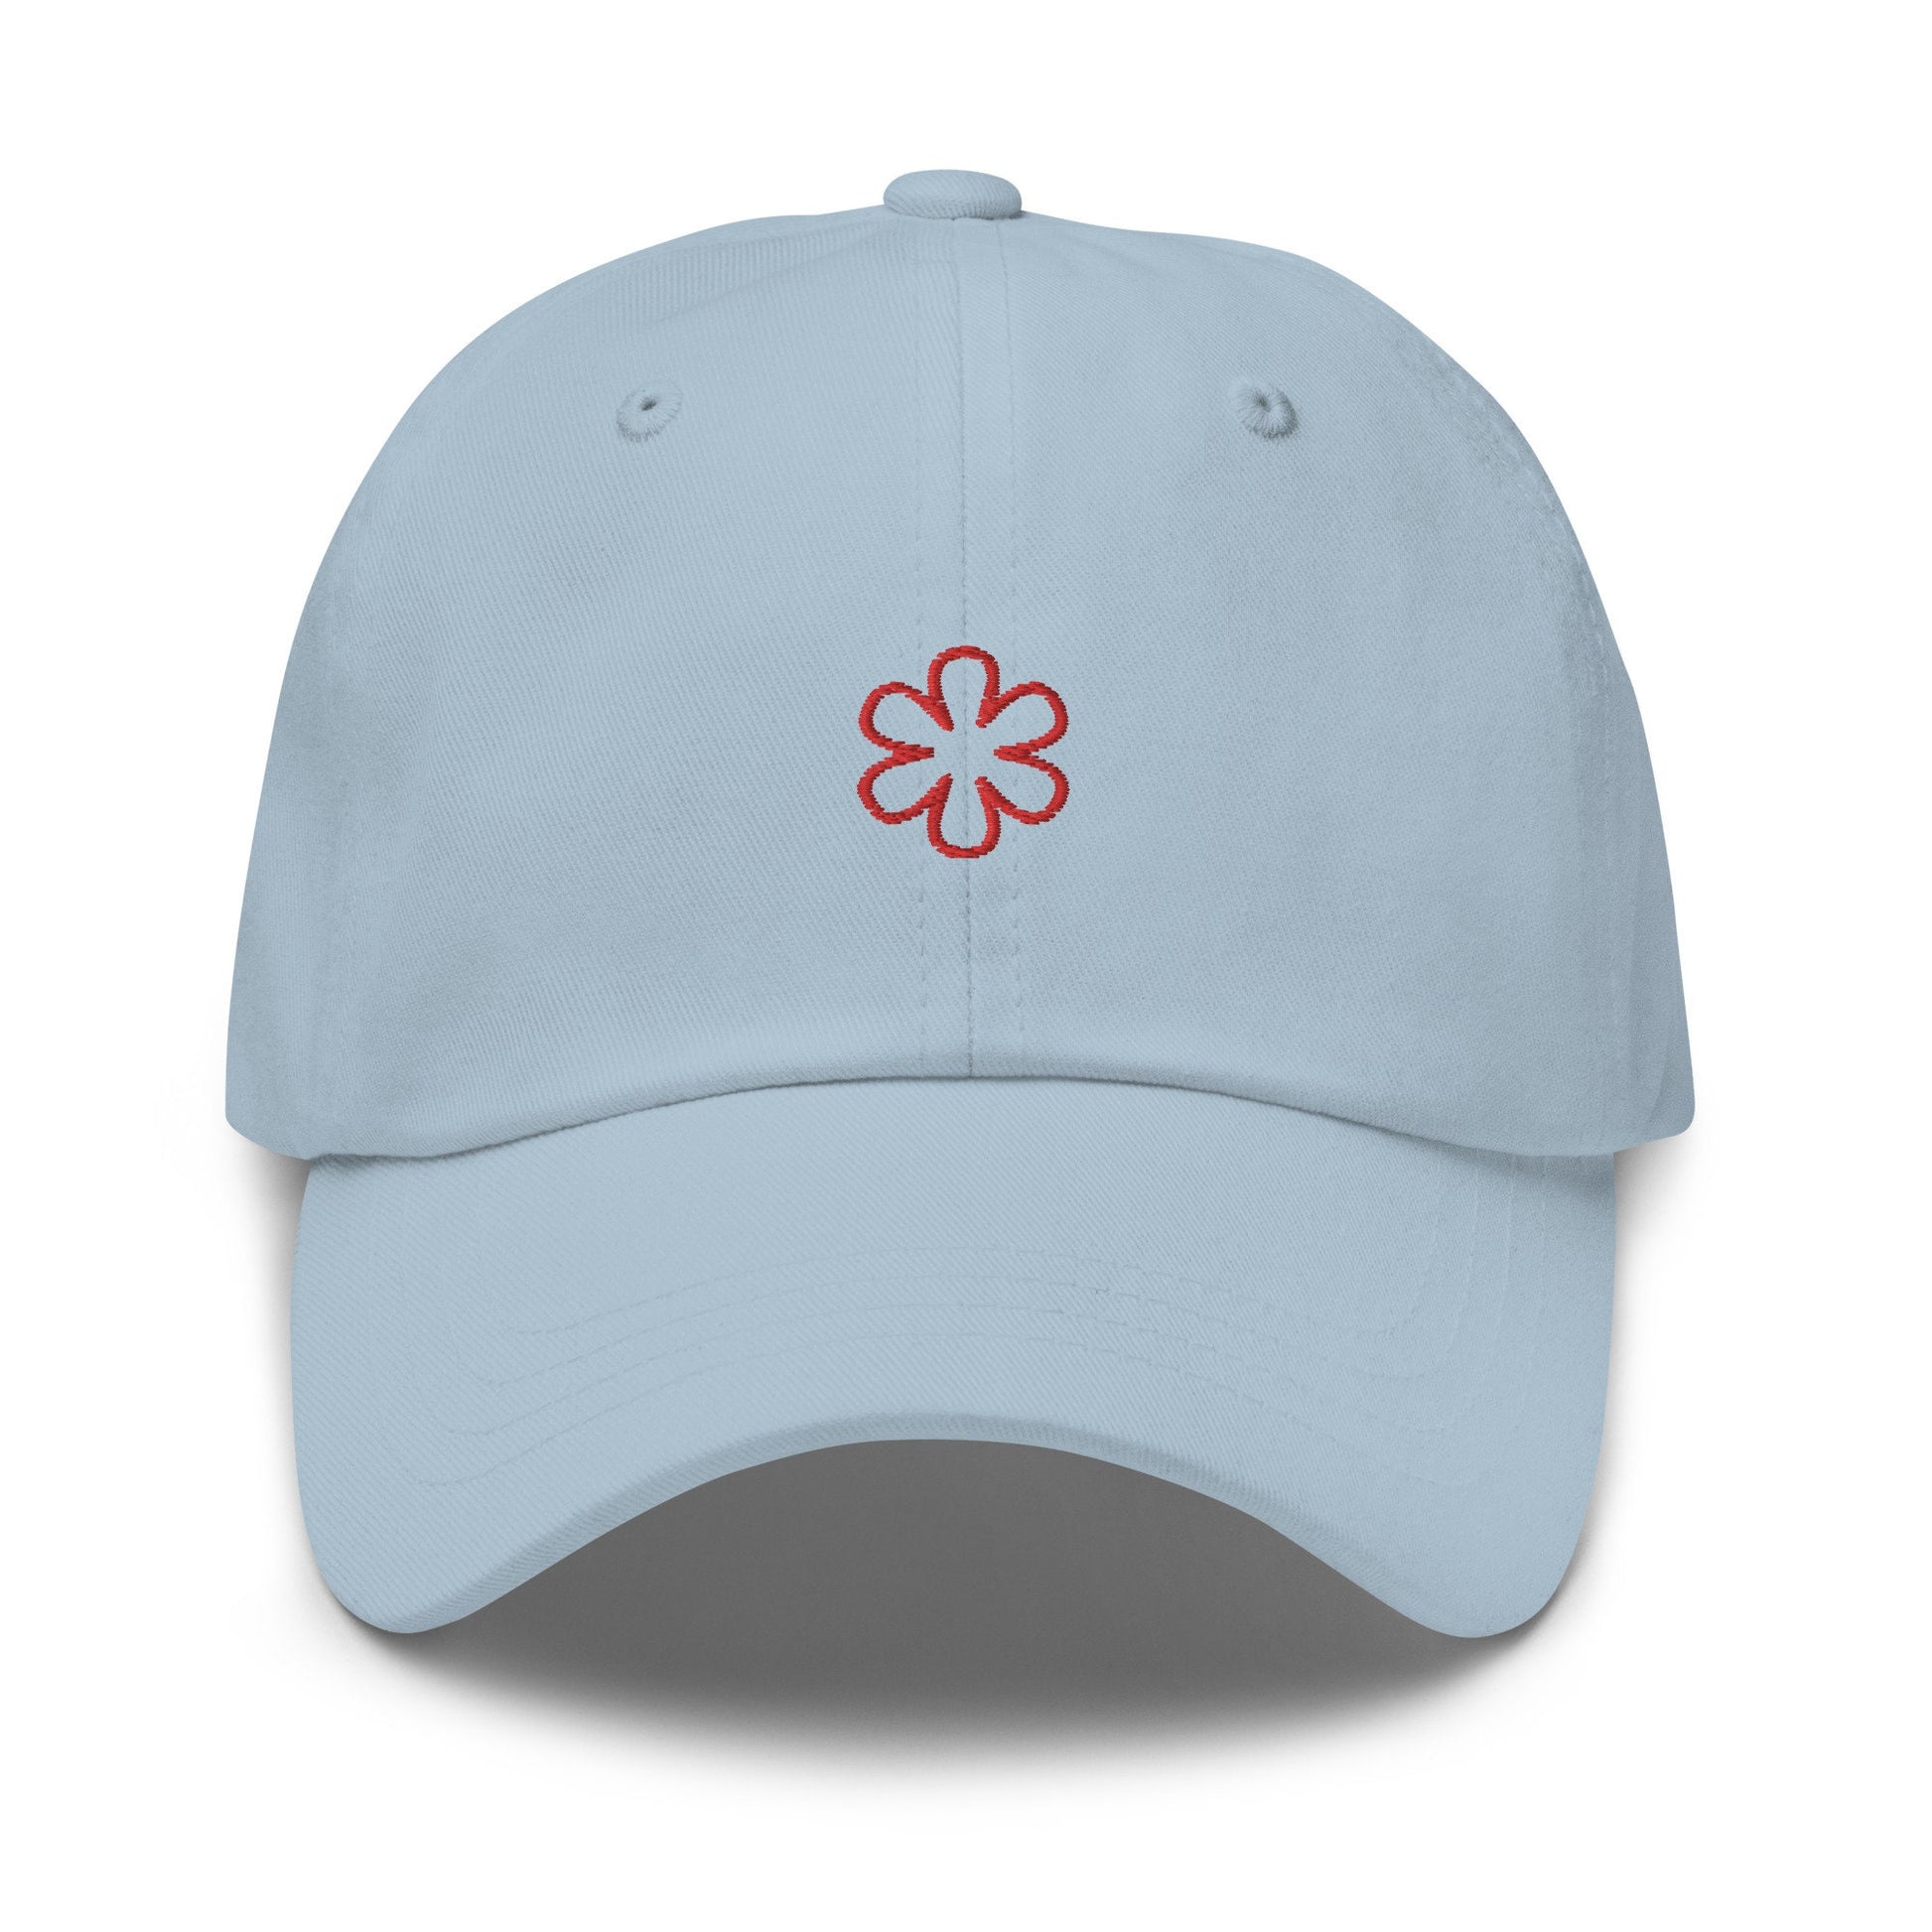 Michelin Star Inspired Dad Hat - Gift for Foodies & Home Chefs - Minimalist Embroidered Cotton Hat